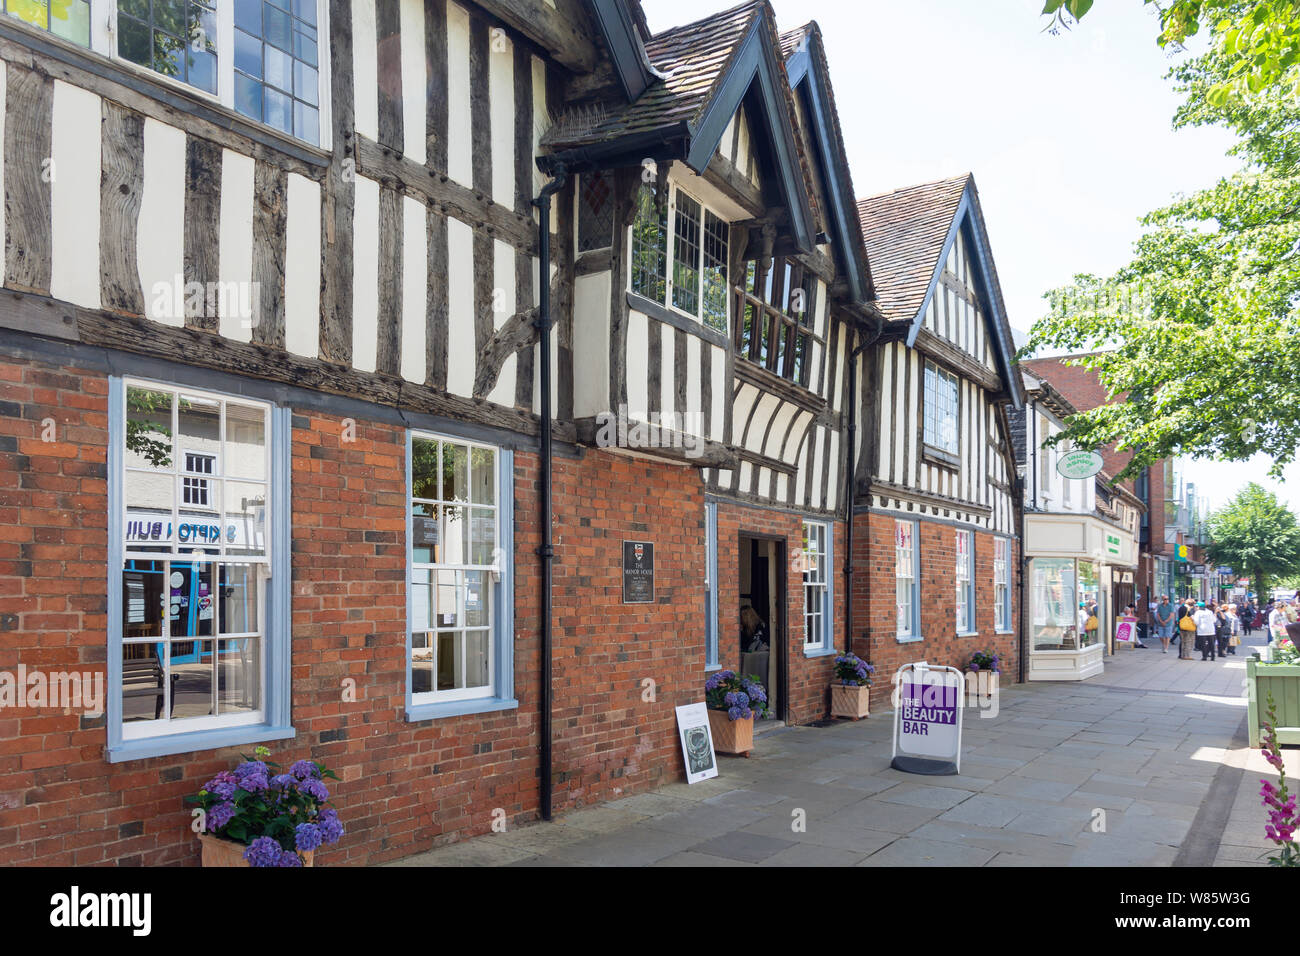 15th century timber-framed Manor House, Solihull High Street, Solihull, West Midlands, England, United Kingdom Stock Photo